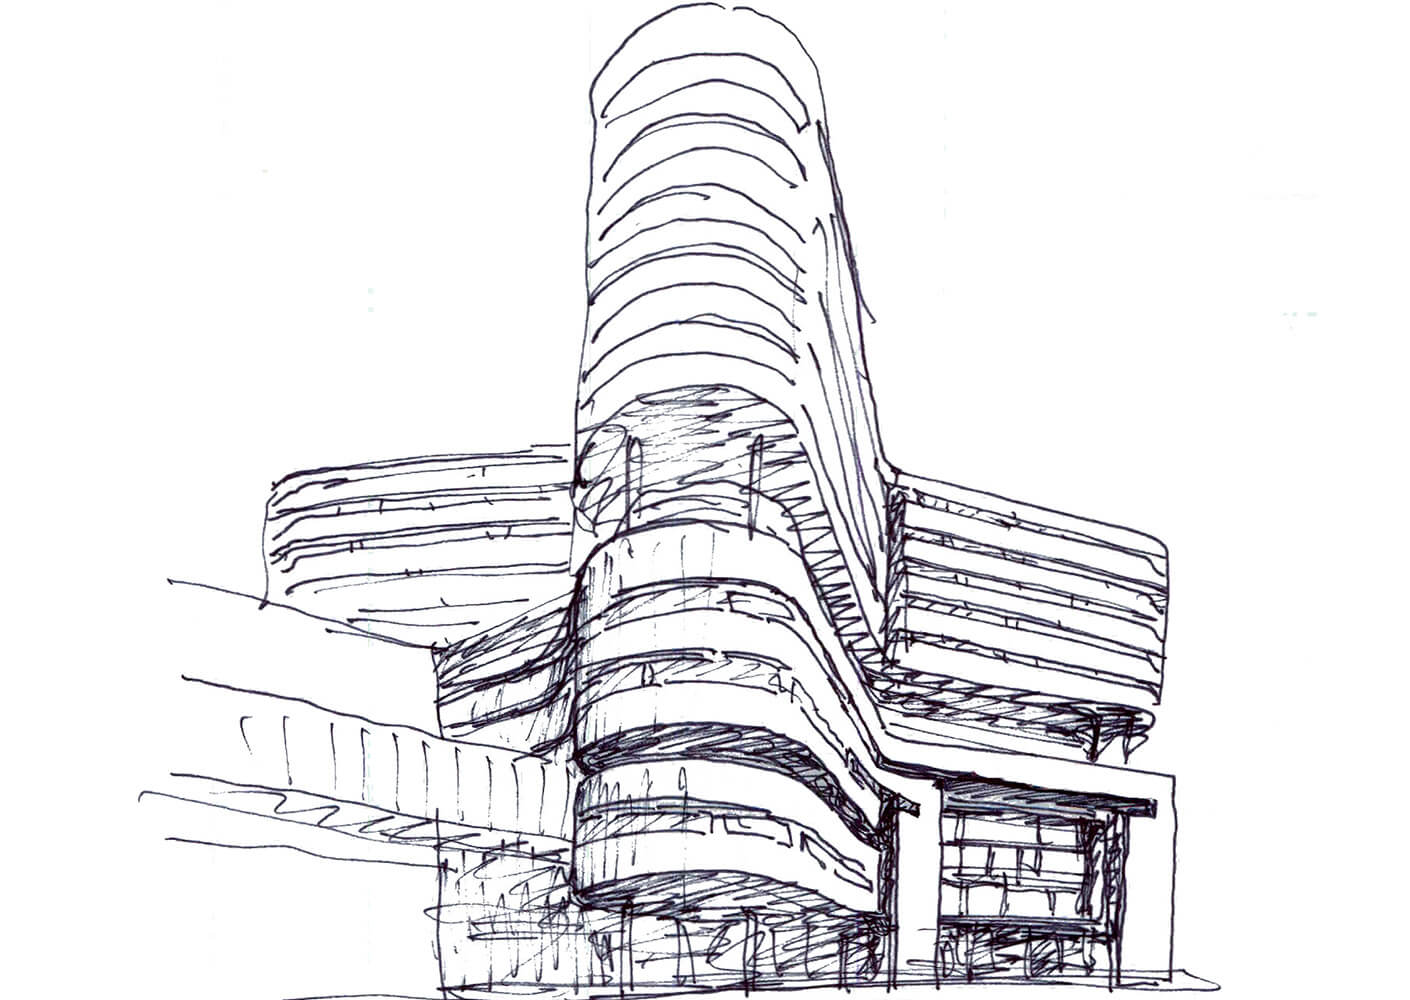 Black ink on white paper sketch of Rush University Medical Center butterfly tower from the urban campus side of building